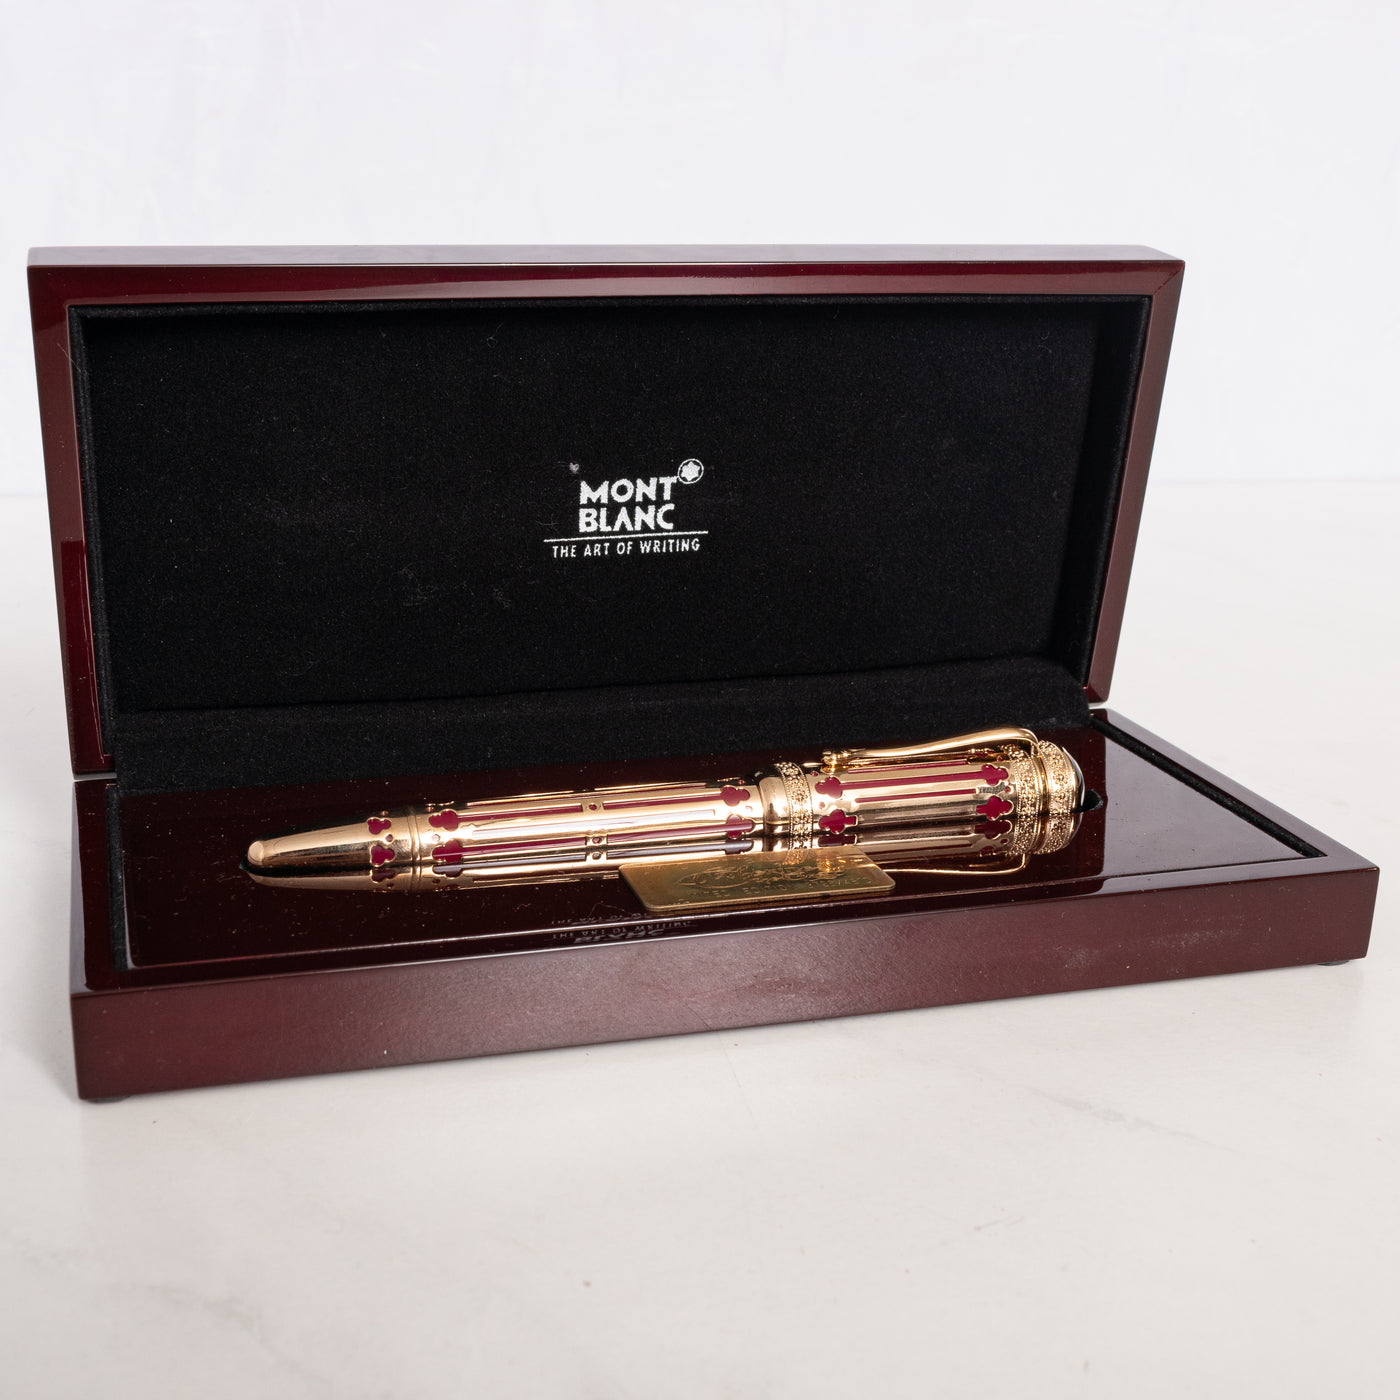 Montblanc Patron of Art Catherine the Great 4810 Fountain Pen wooden lacquer box